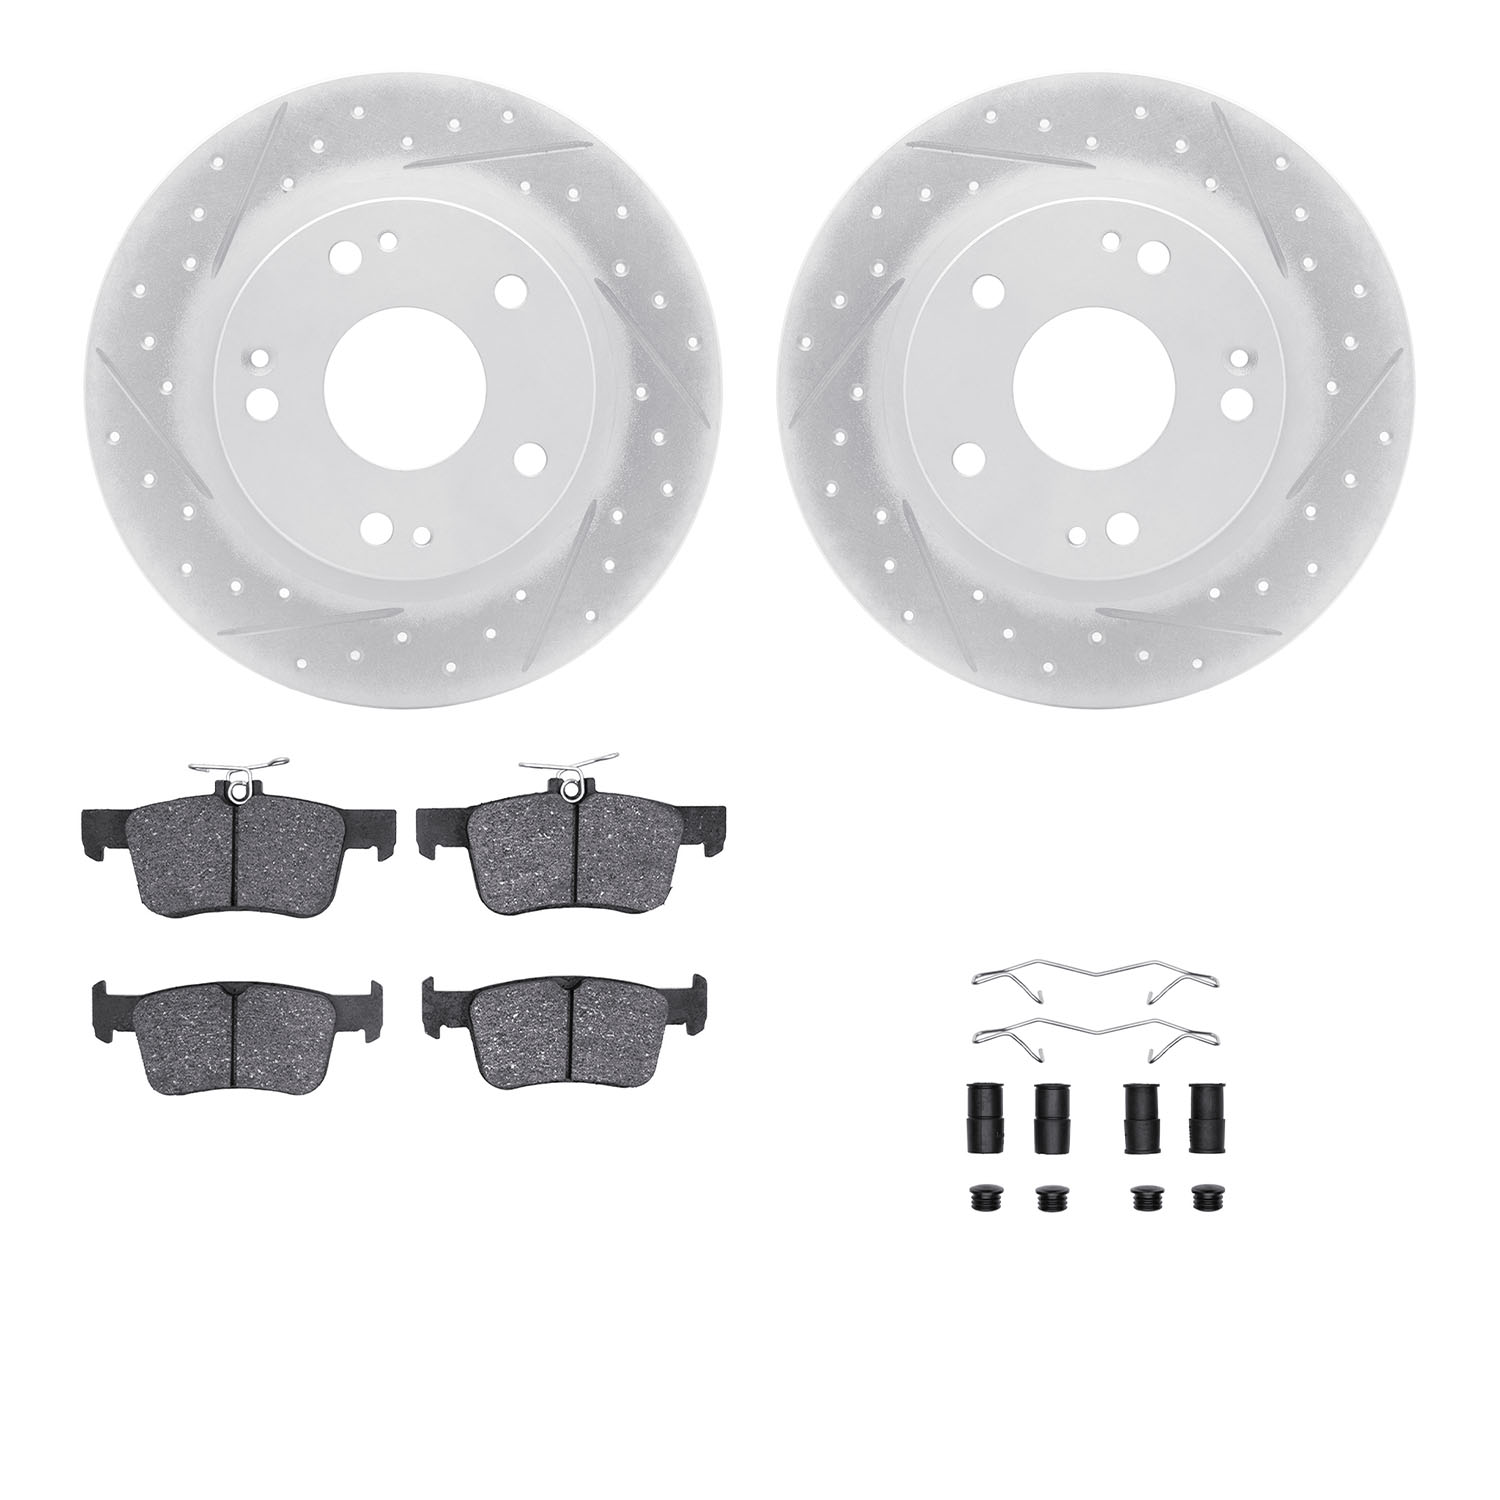 2512-59087 Geoperformance Drilled/Slotted Rotors w/5000 Advanced Brake Pads Kit & Hardware, Fits Select Acura/Honda, Position: R